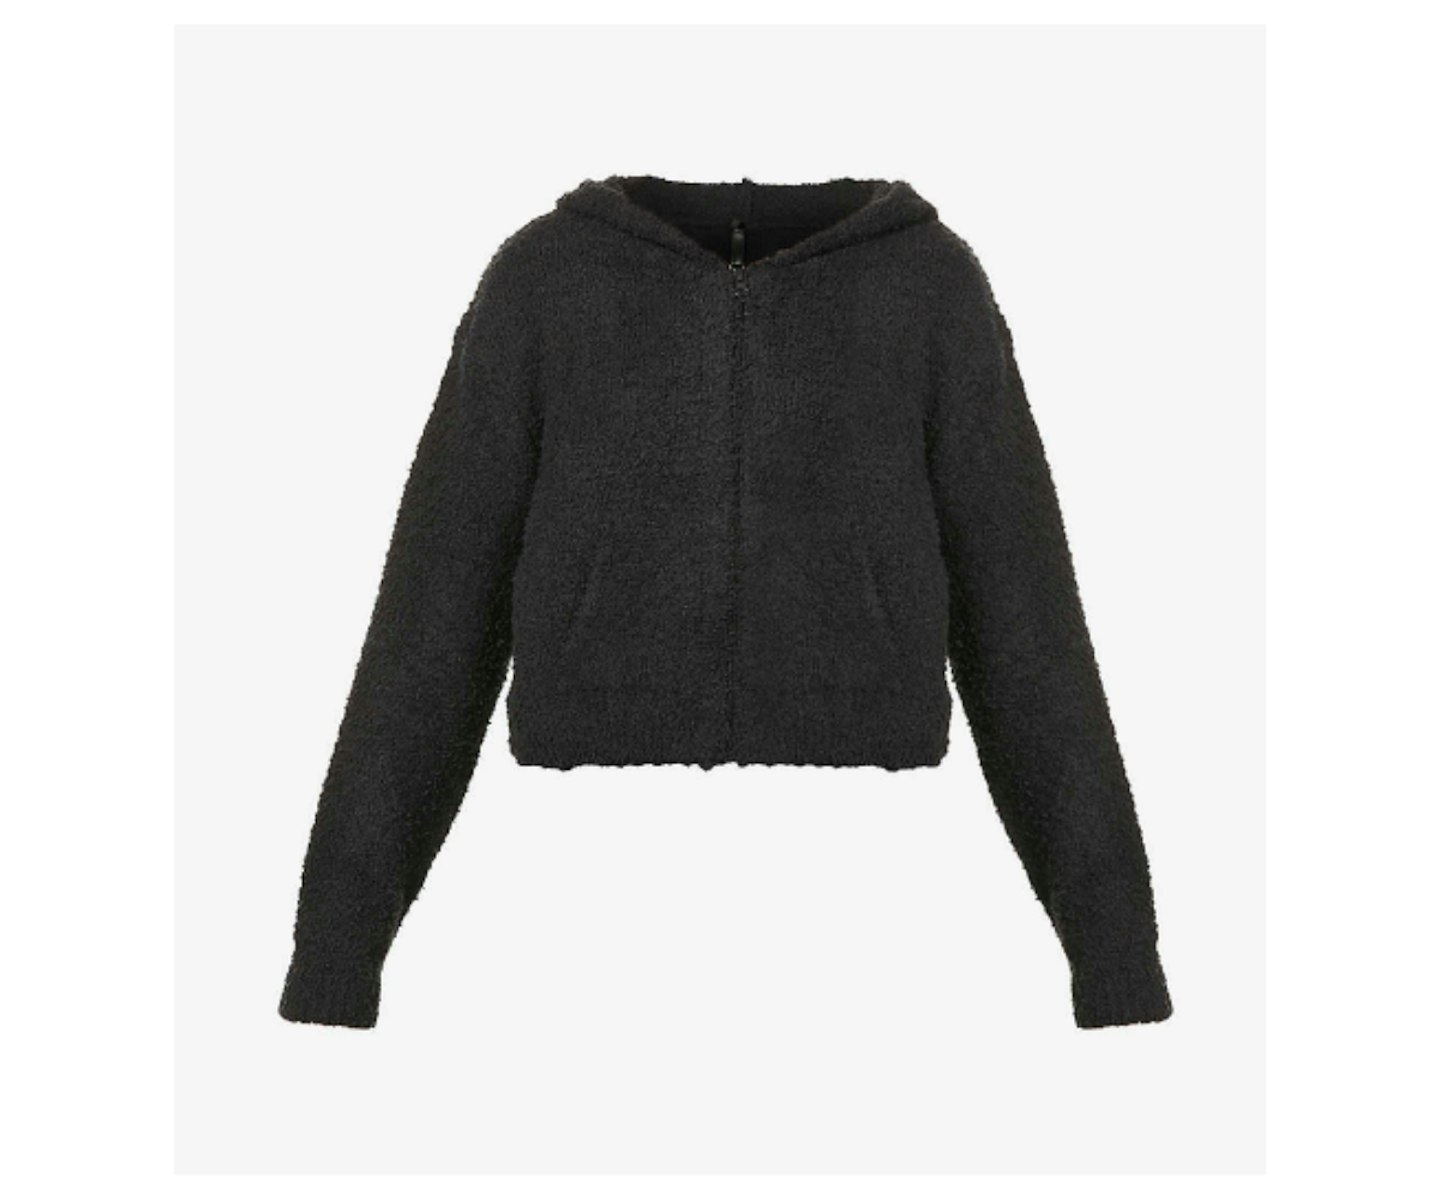 Cozy boucle knitted hoody